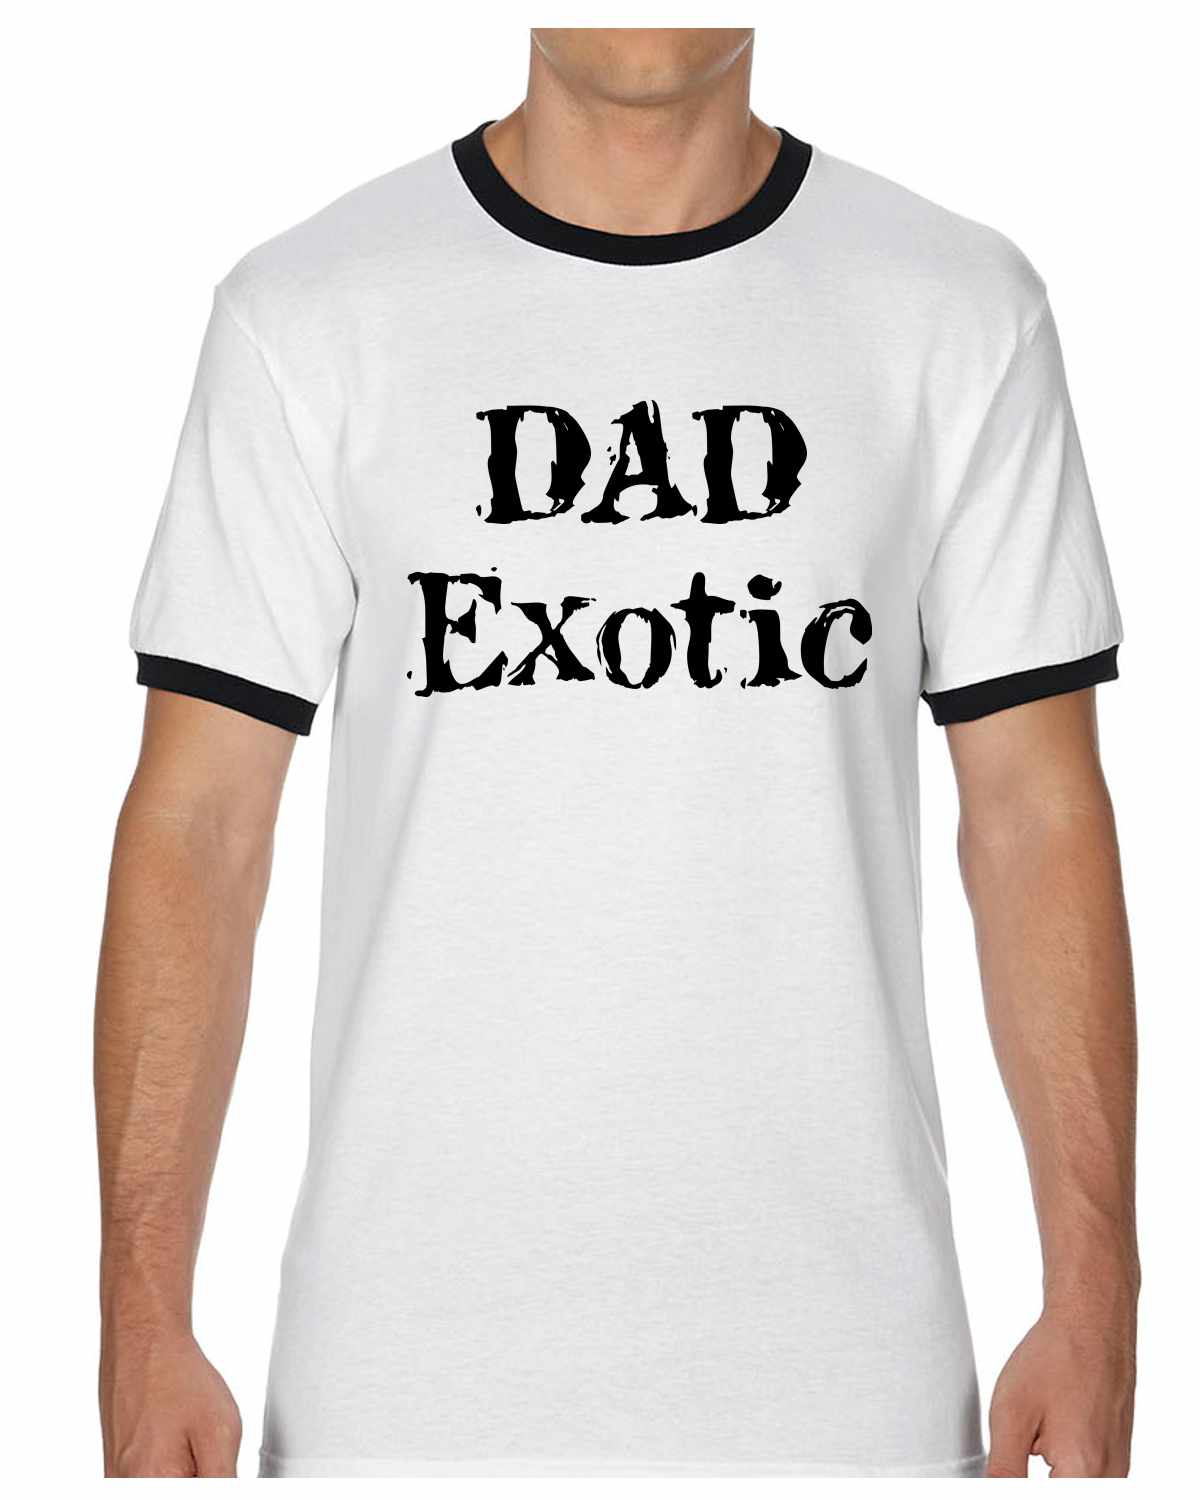 DAD EXOTIC funny Fathers Day Birthday Shirt Ringer Tee (#1117-8)